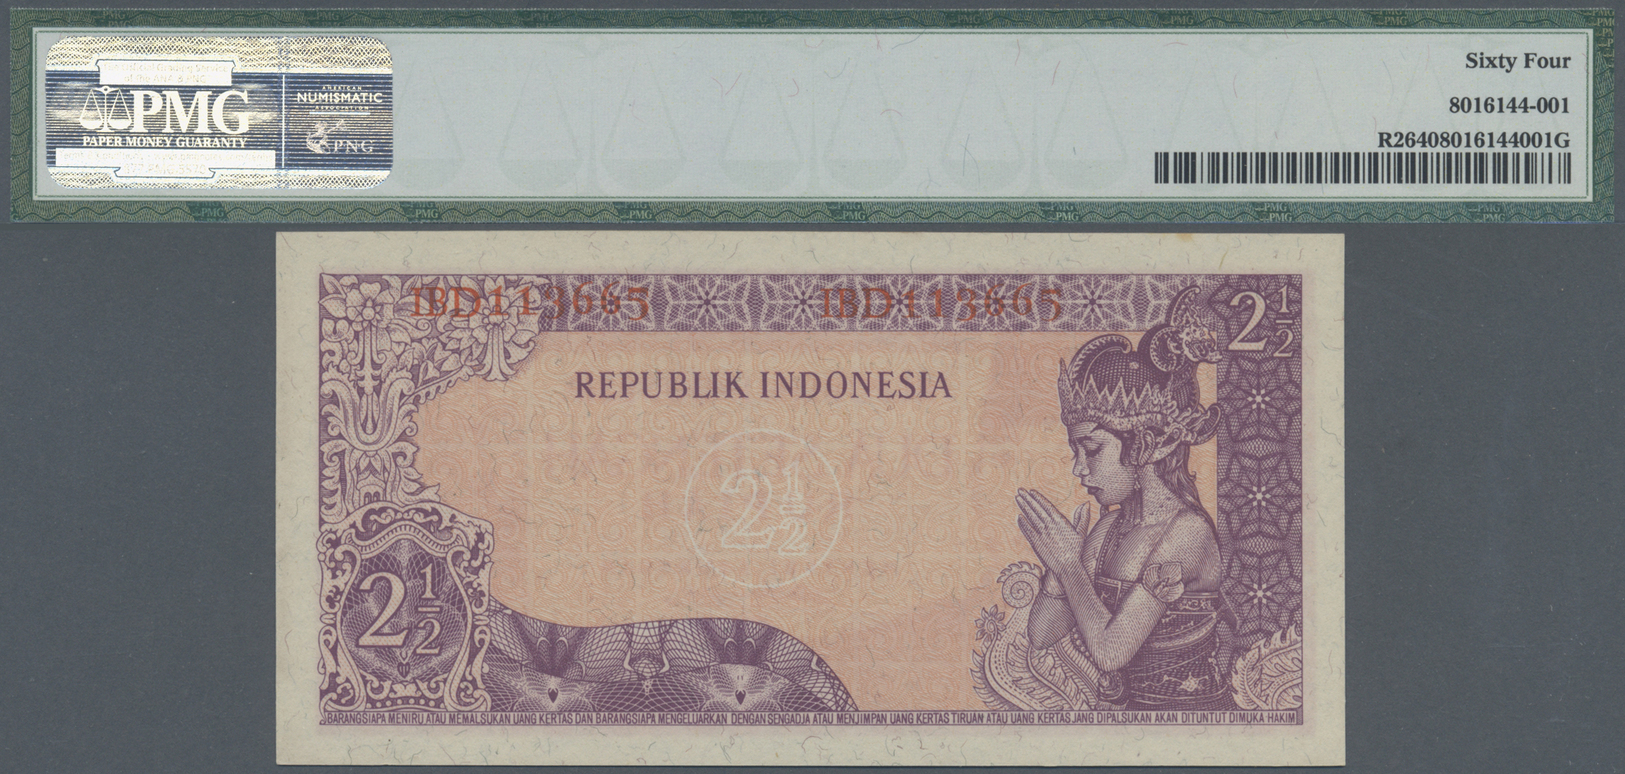 01157 Indonesia / Indonesien: 2 1/2 Rupiah 1961 (ND 1963) With "IRIAN BARAT" Overprint At Lower Right Margin, P.R2 In Ex - Indonesia